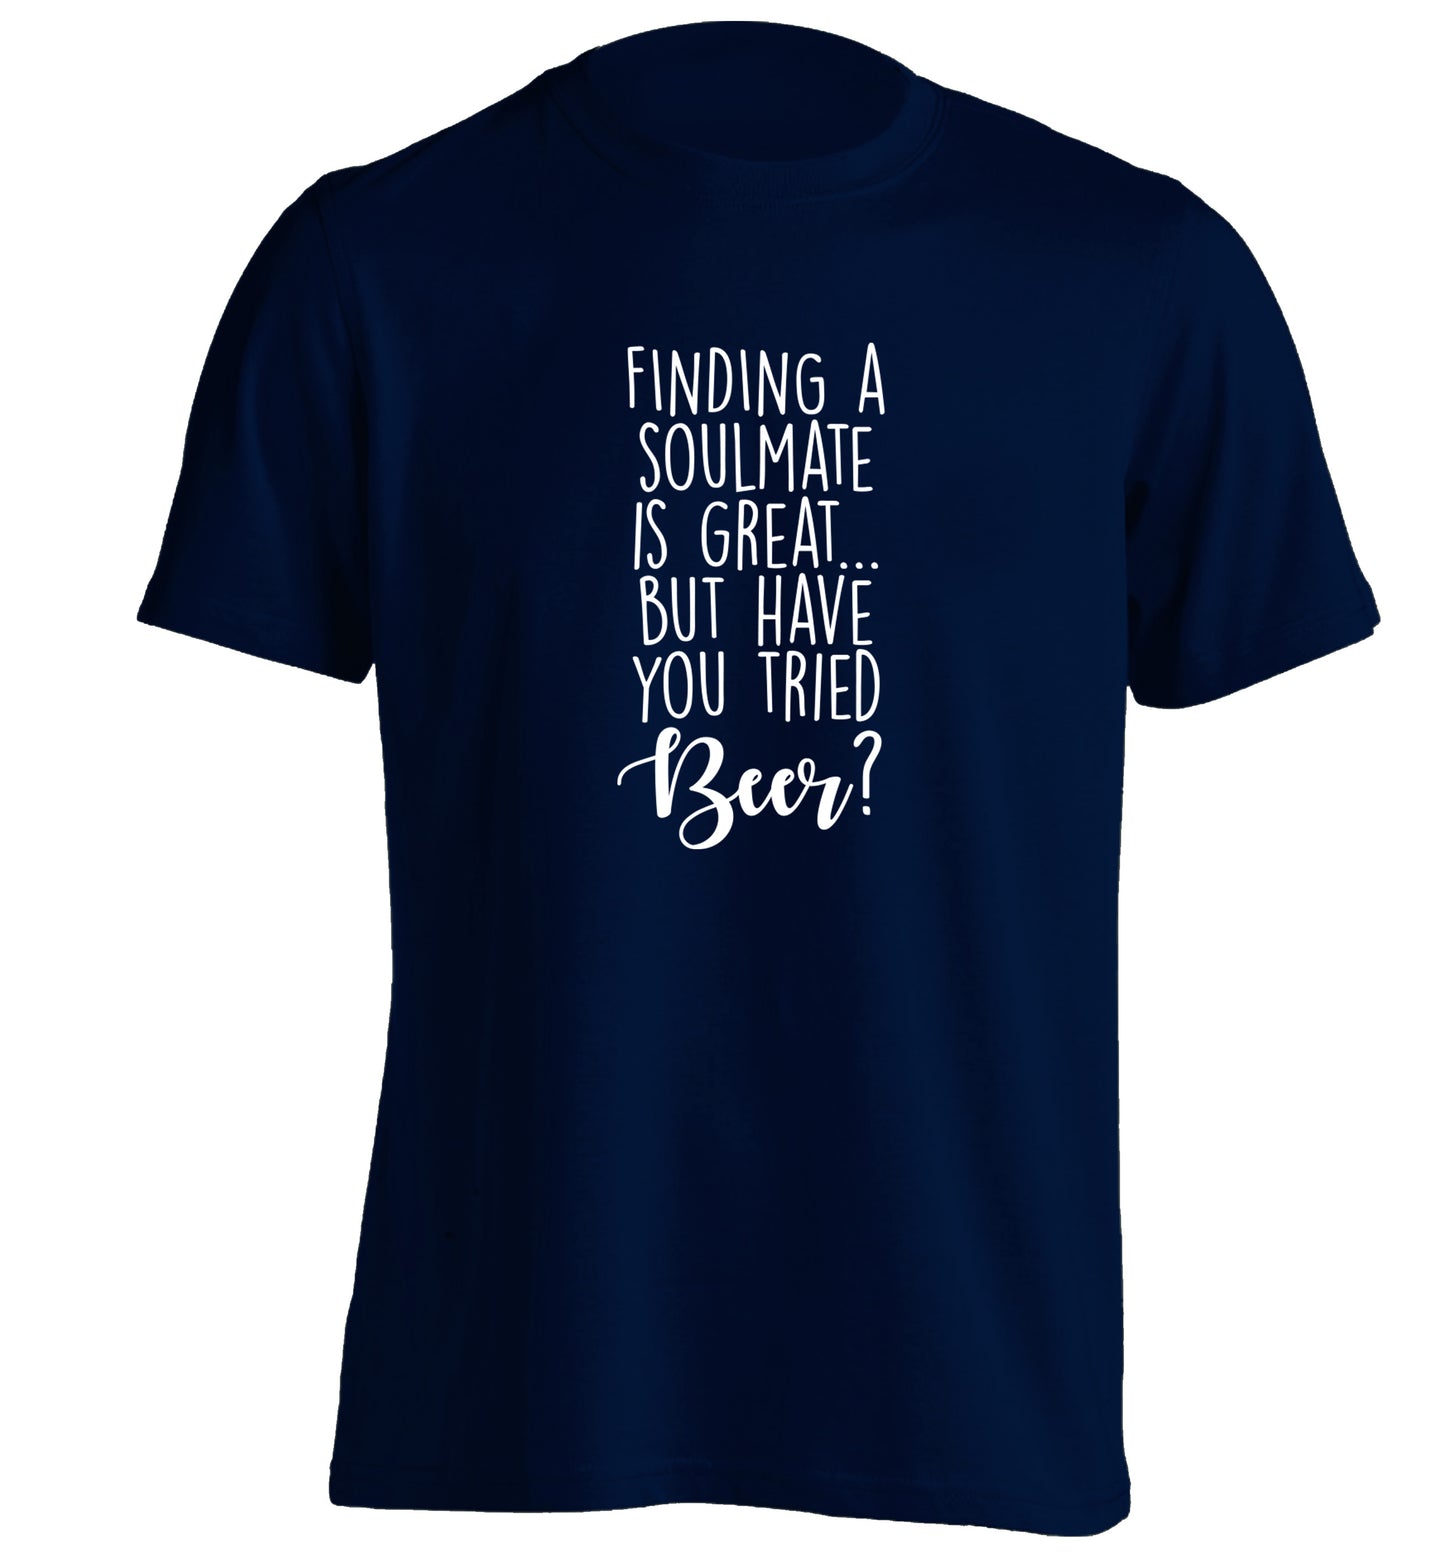 Finding a soulmate is great but have you tried beer? adults unisex navy Tshirt 2XL